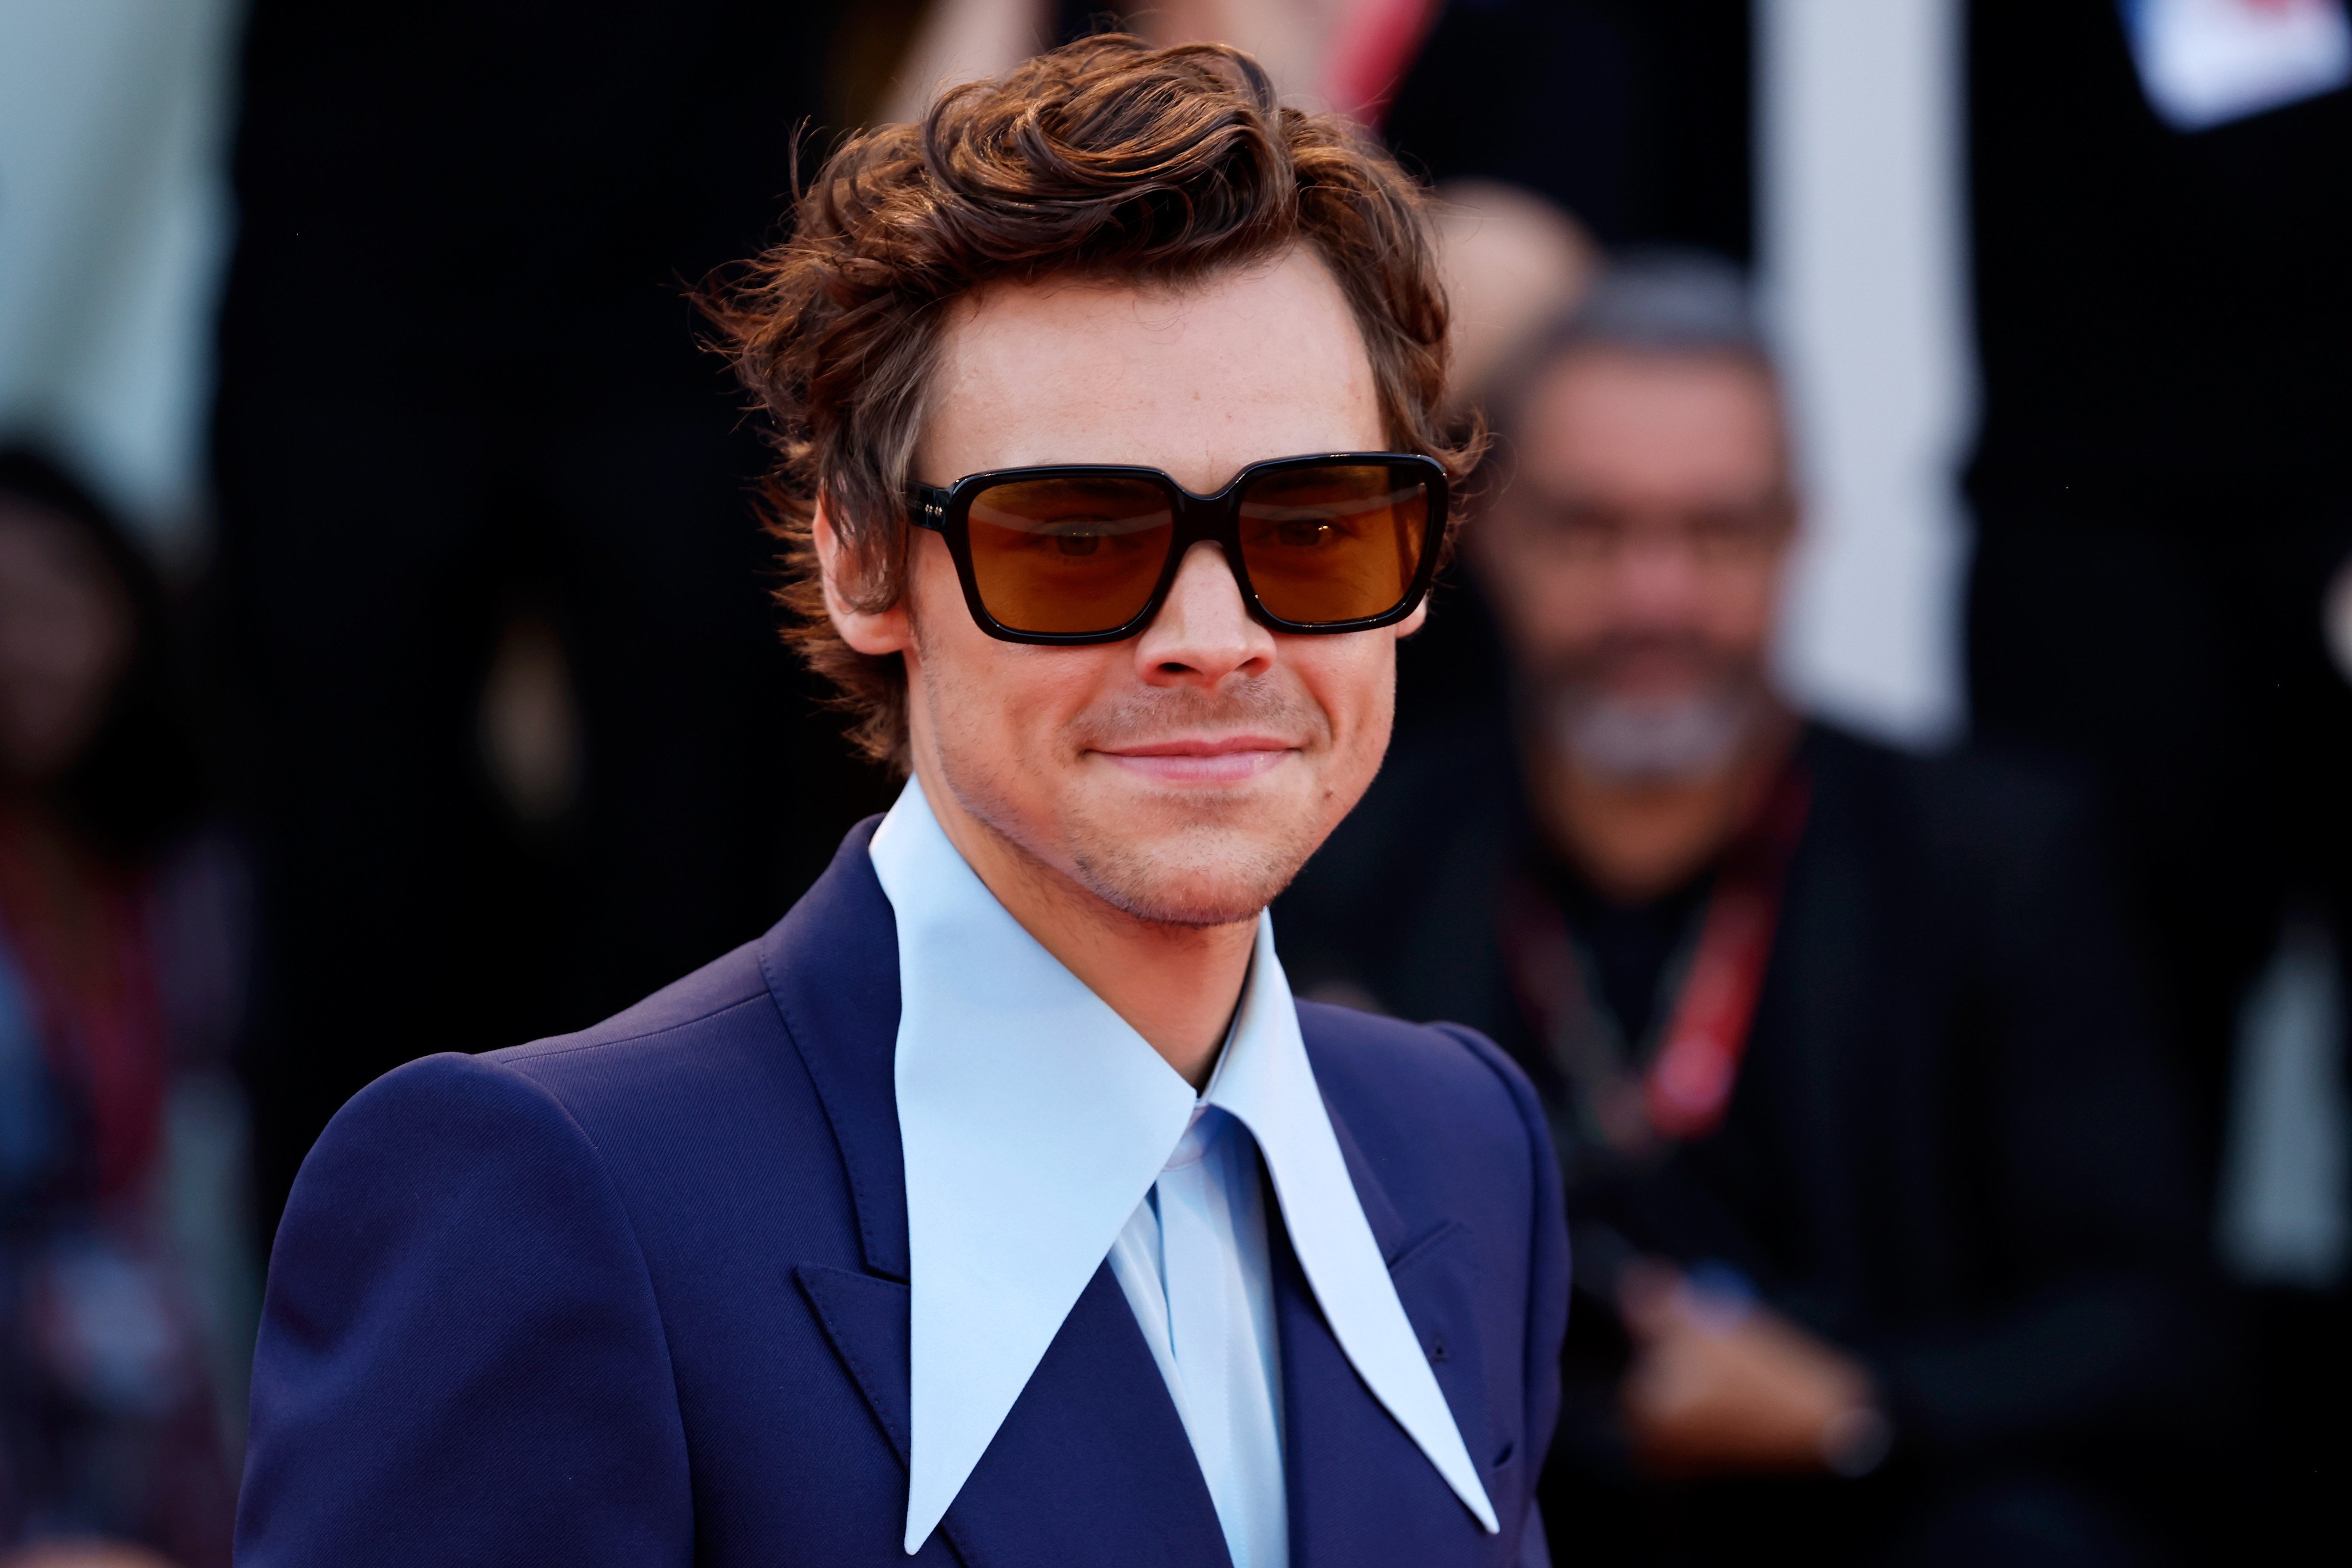 Harry Styles attends the 'Don't Worry Darling' red carpet at the 79th Venice International Film Festival